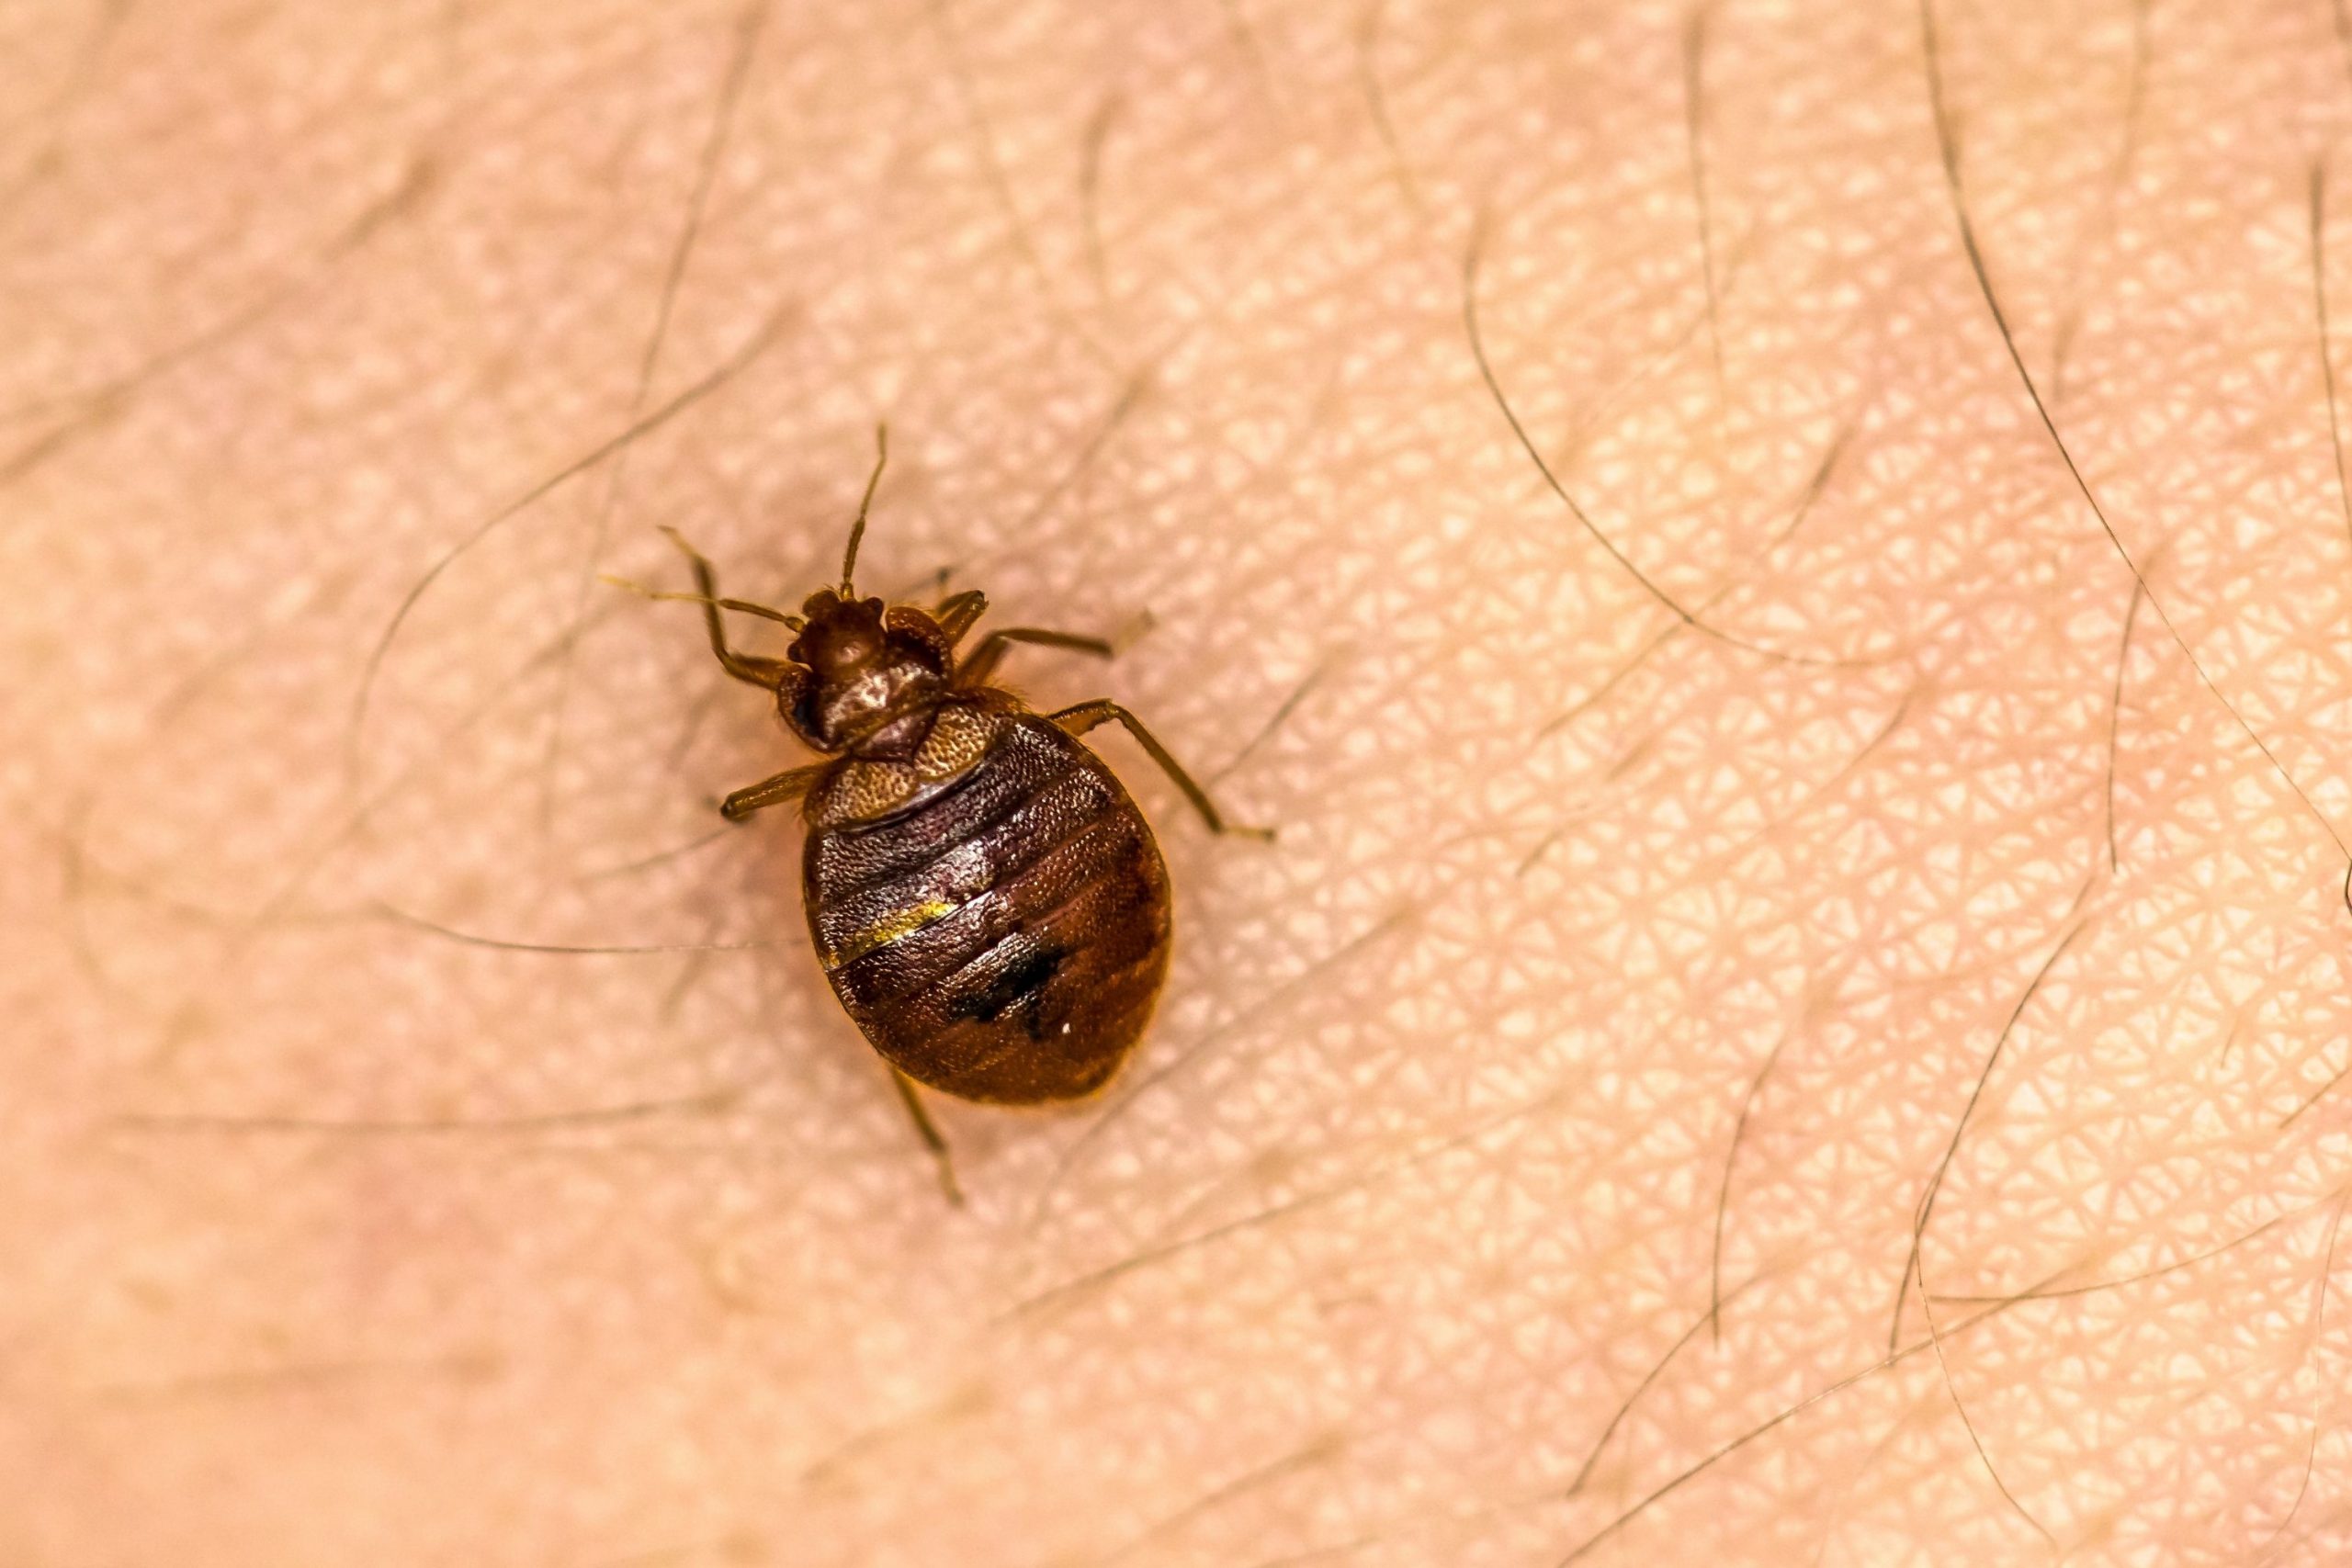 How to Inspect Your Couch For Bed Bugs Infestation